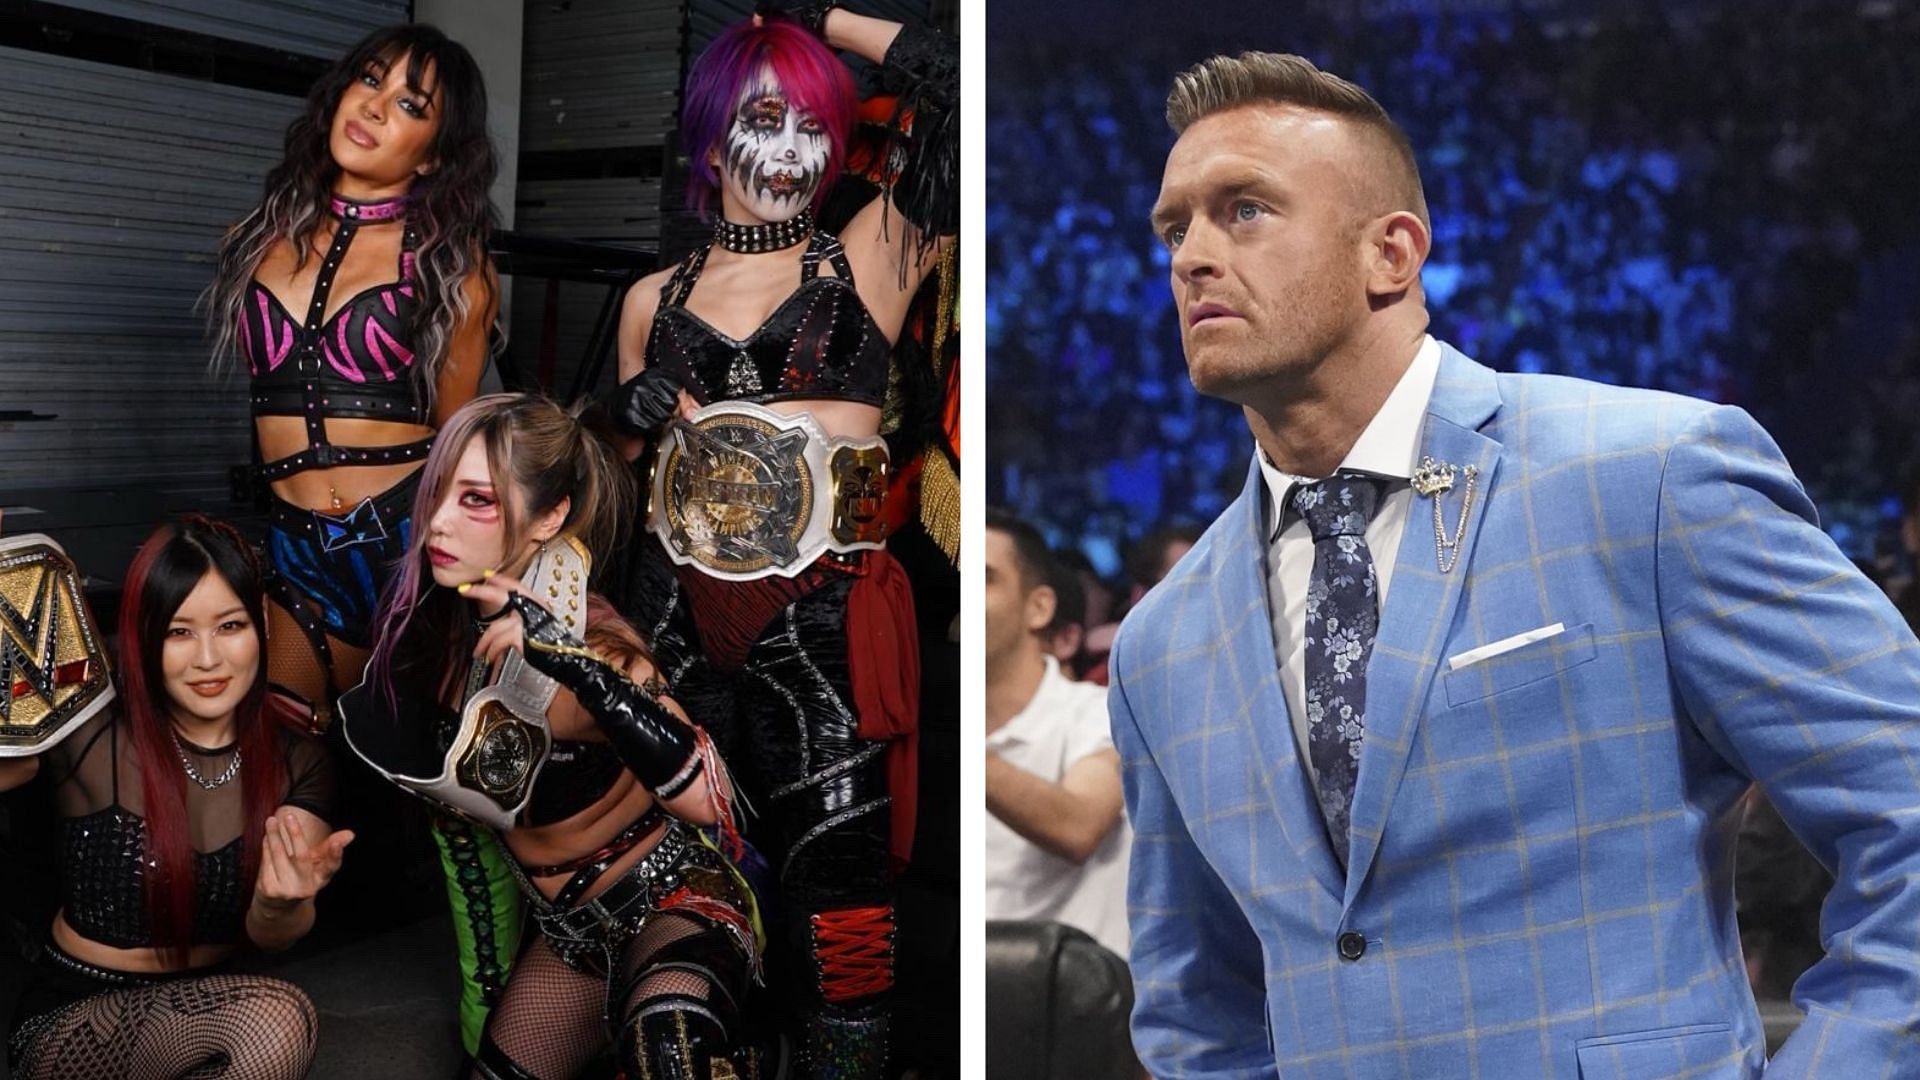 WWE and SmackDown General Manager could make International Women